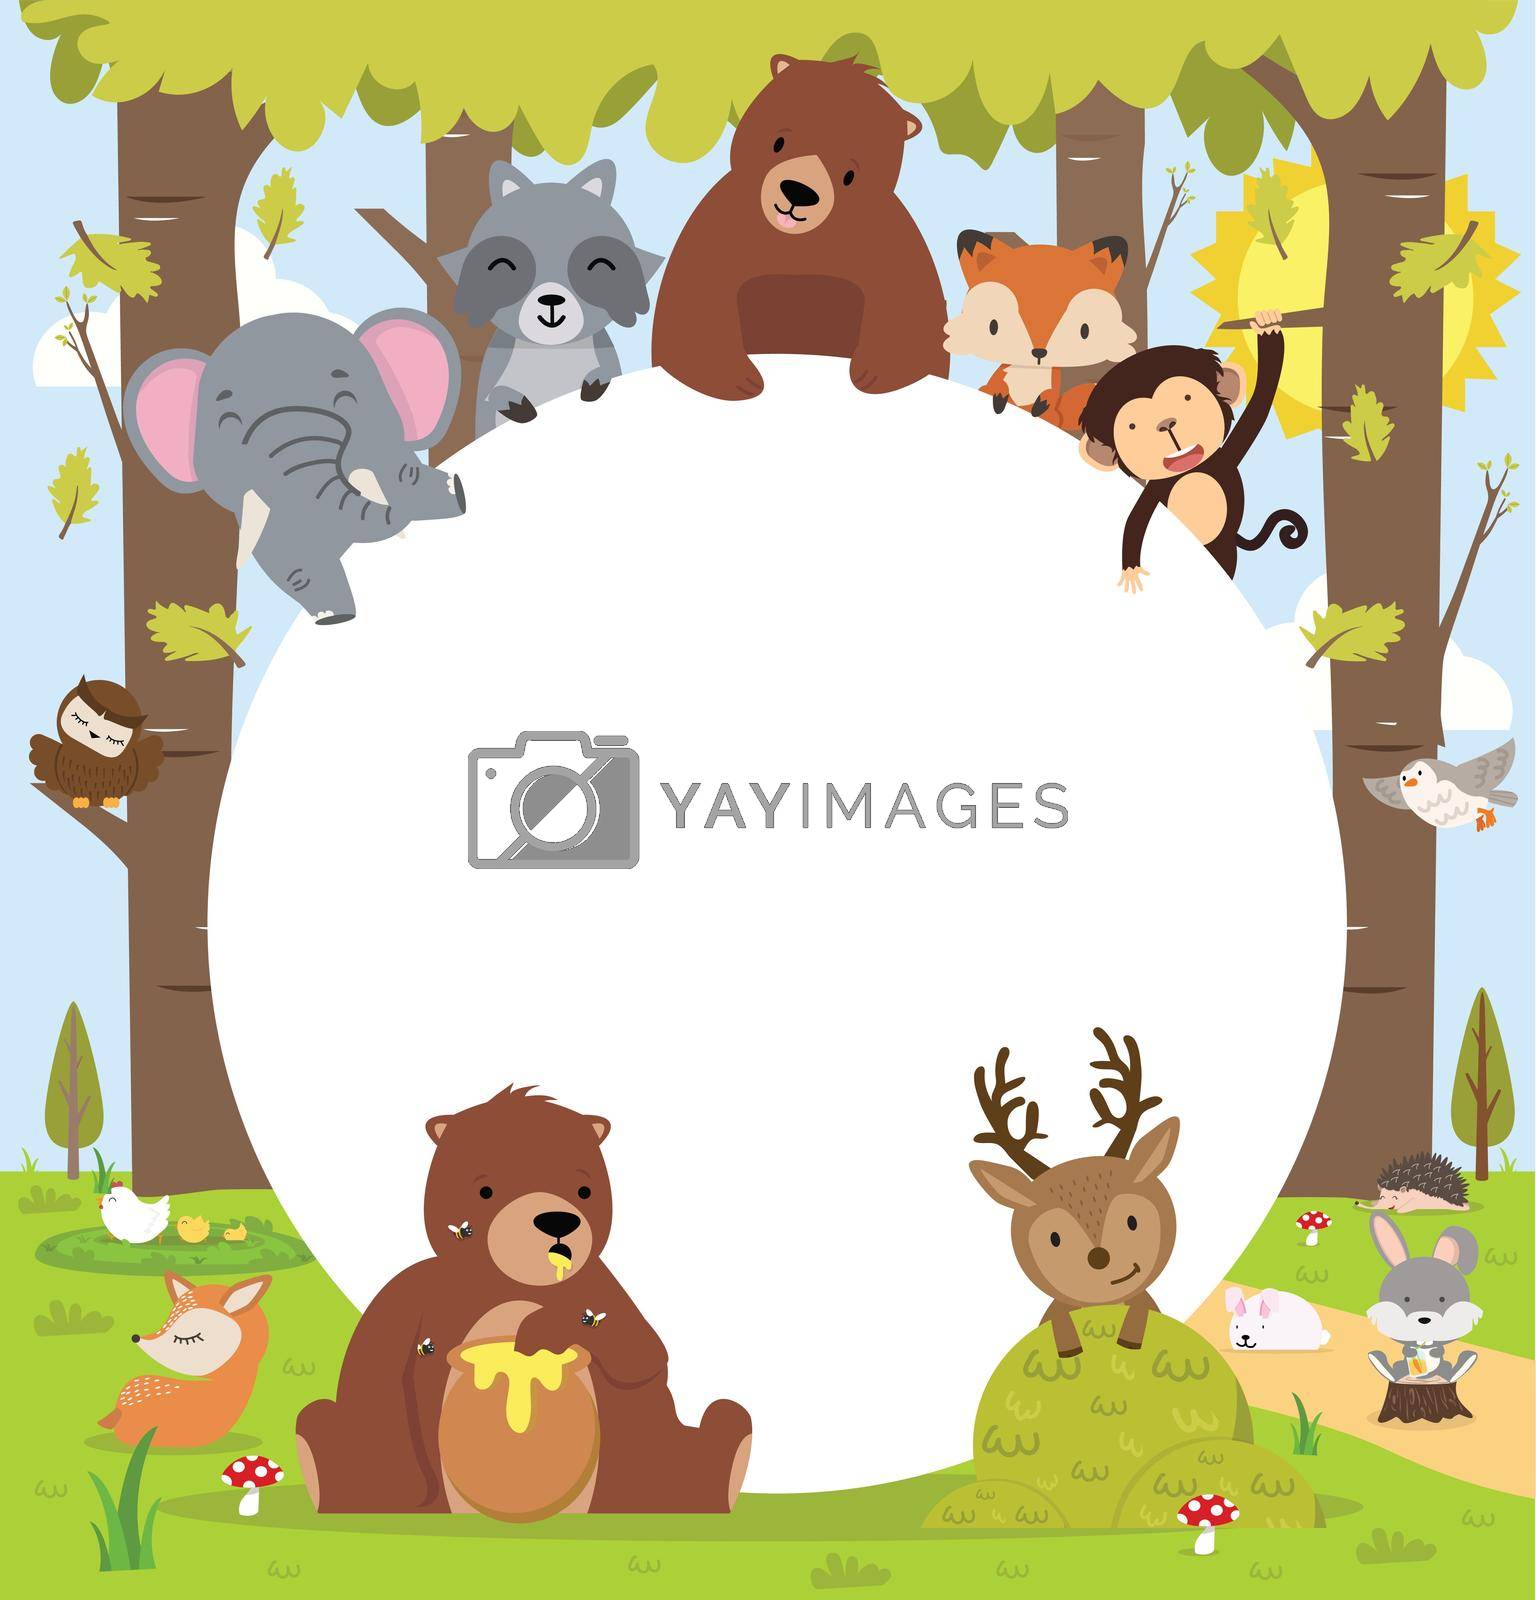 Royalty free image of Animals woodland forest  with copy space by focus_bell